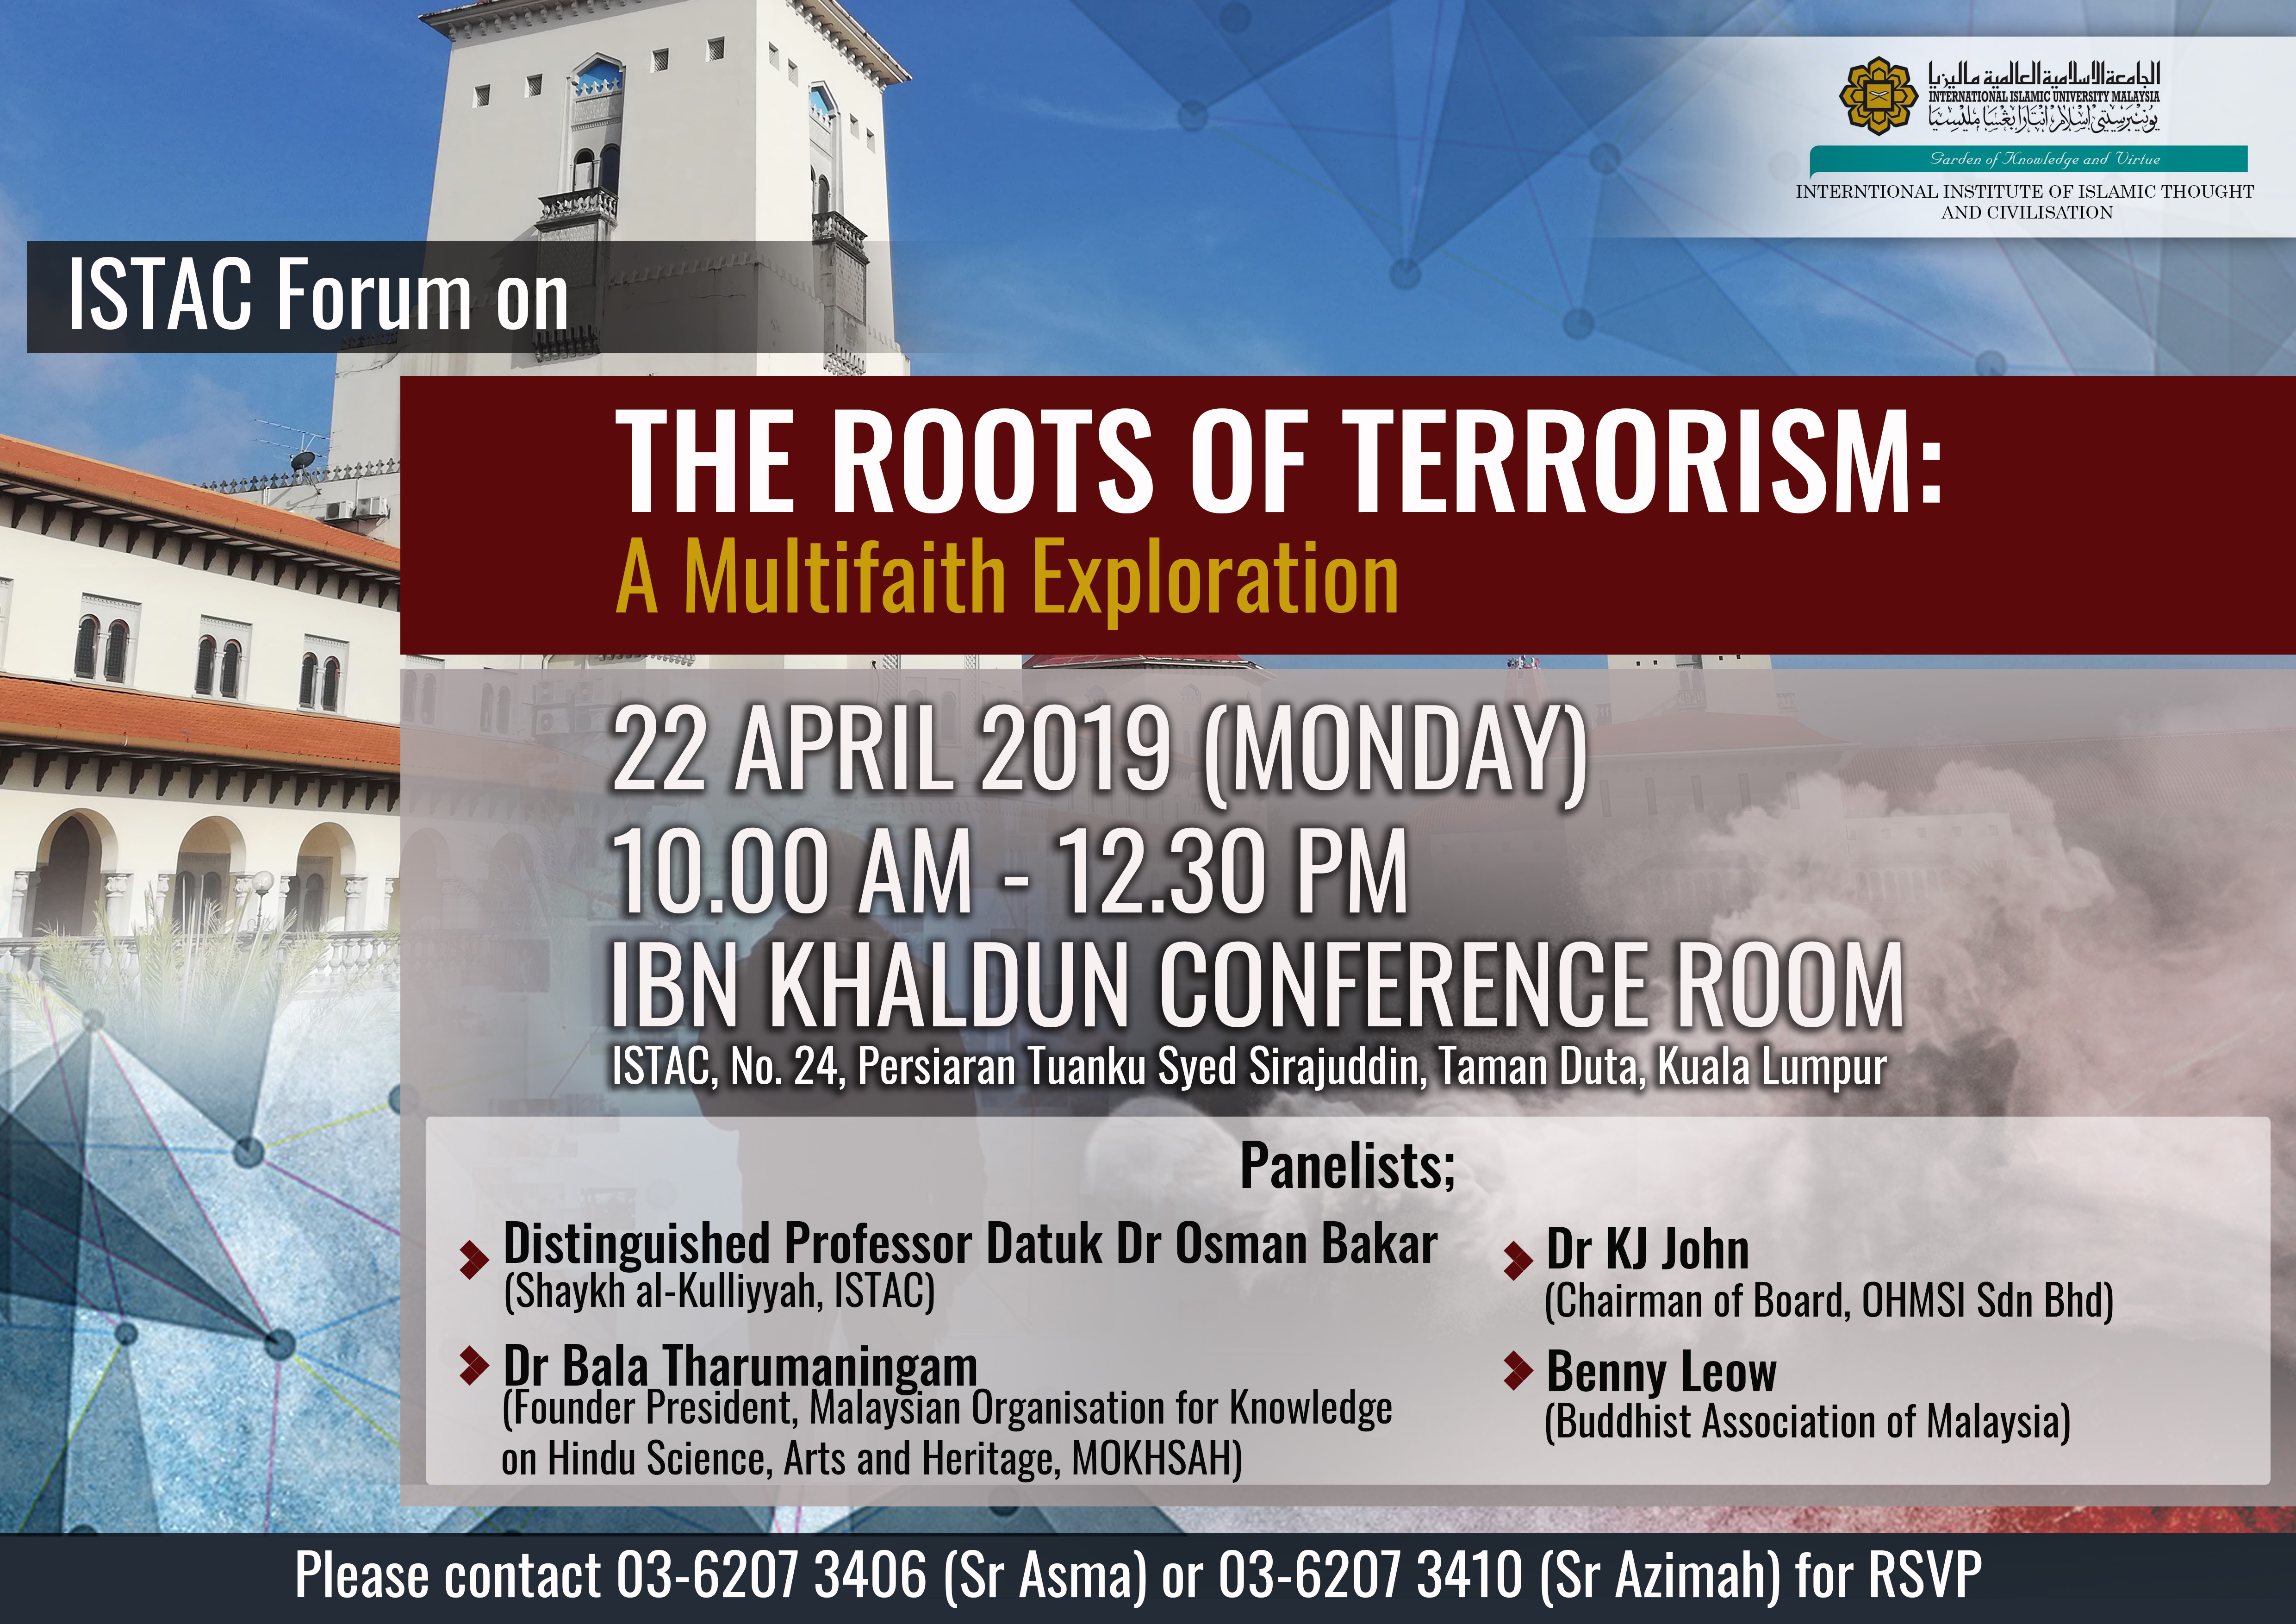 ISTAC FORUM ON THE ROOTS OF TERRORISM: A Multifaith Exploration